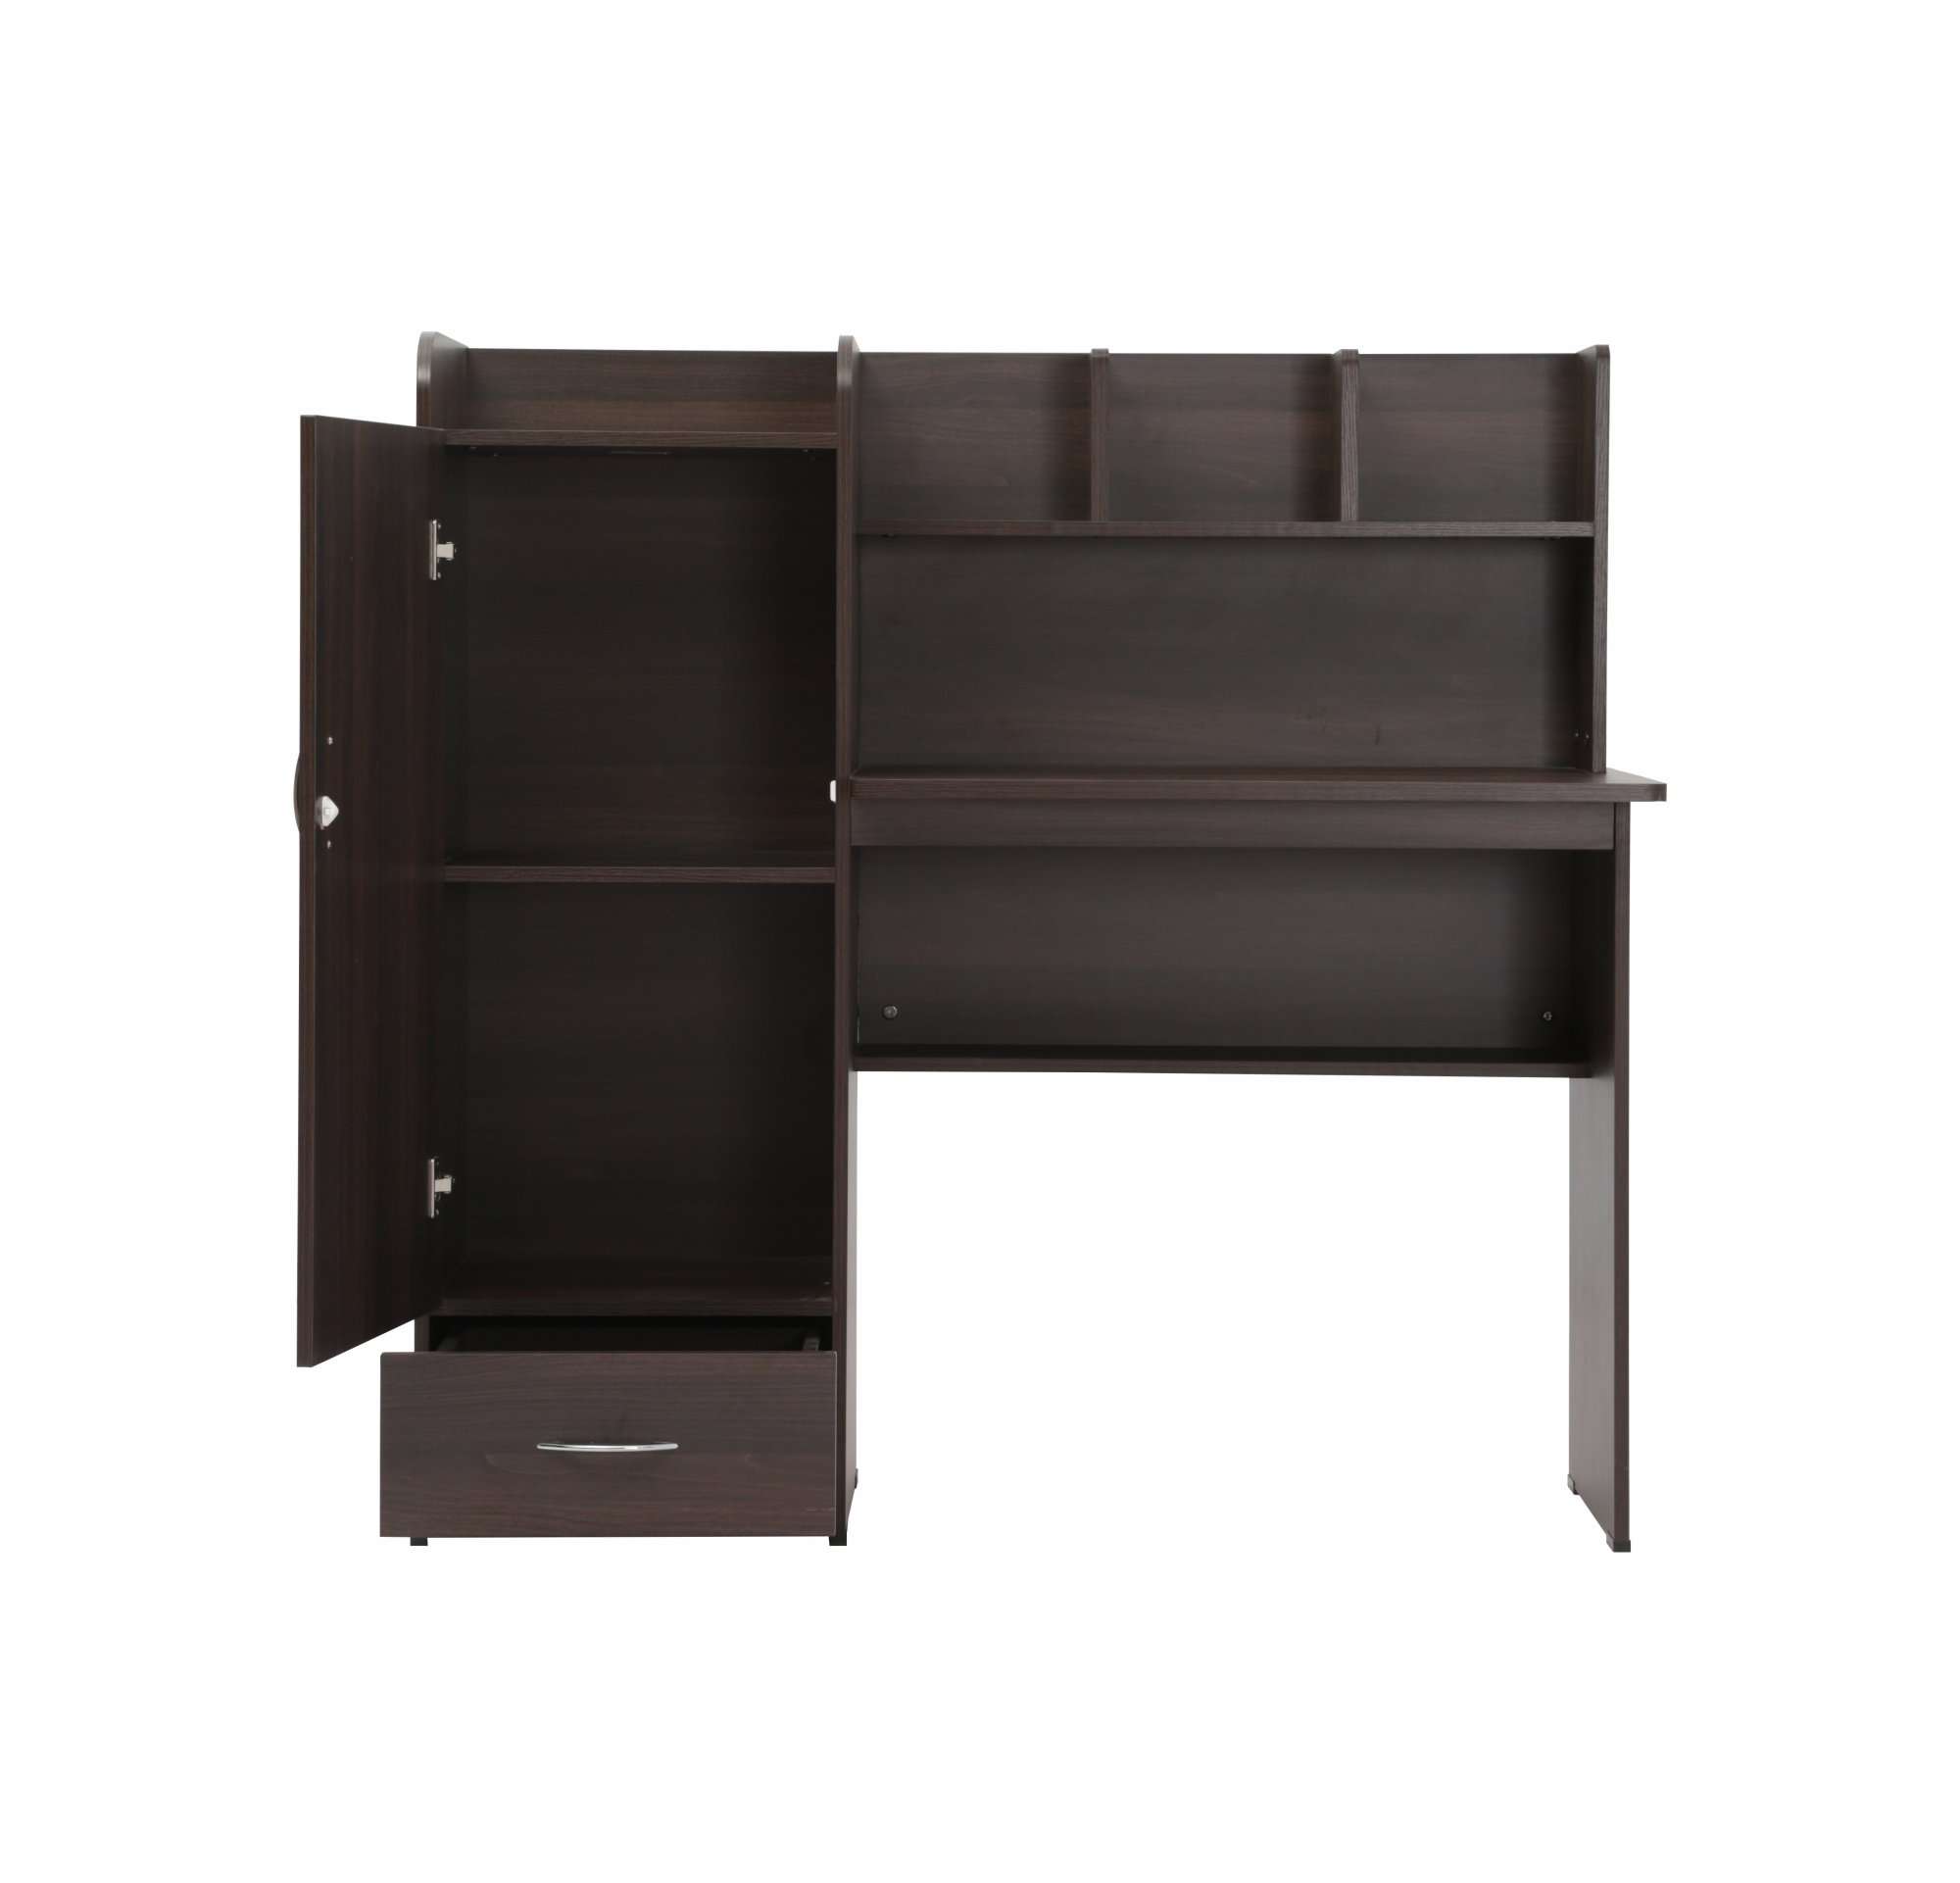 KSD003-Study Desk With Cupboard & Drawers-M42